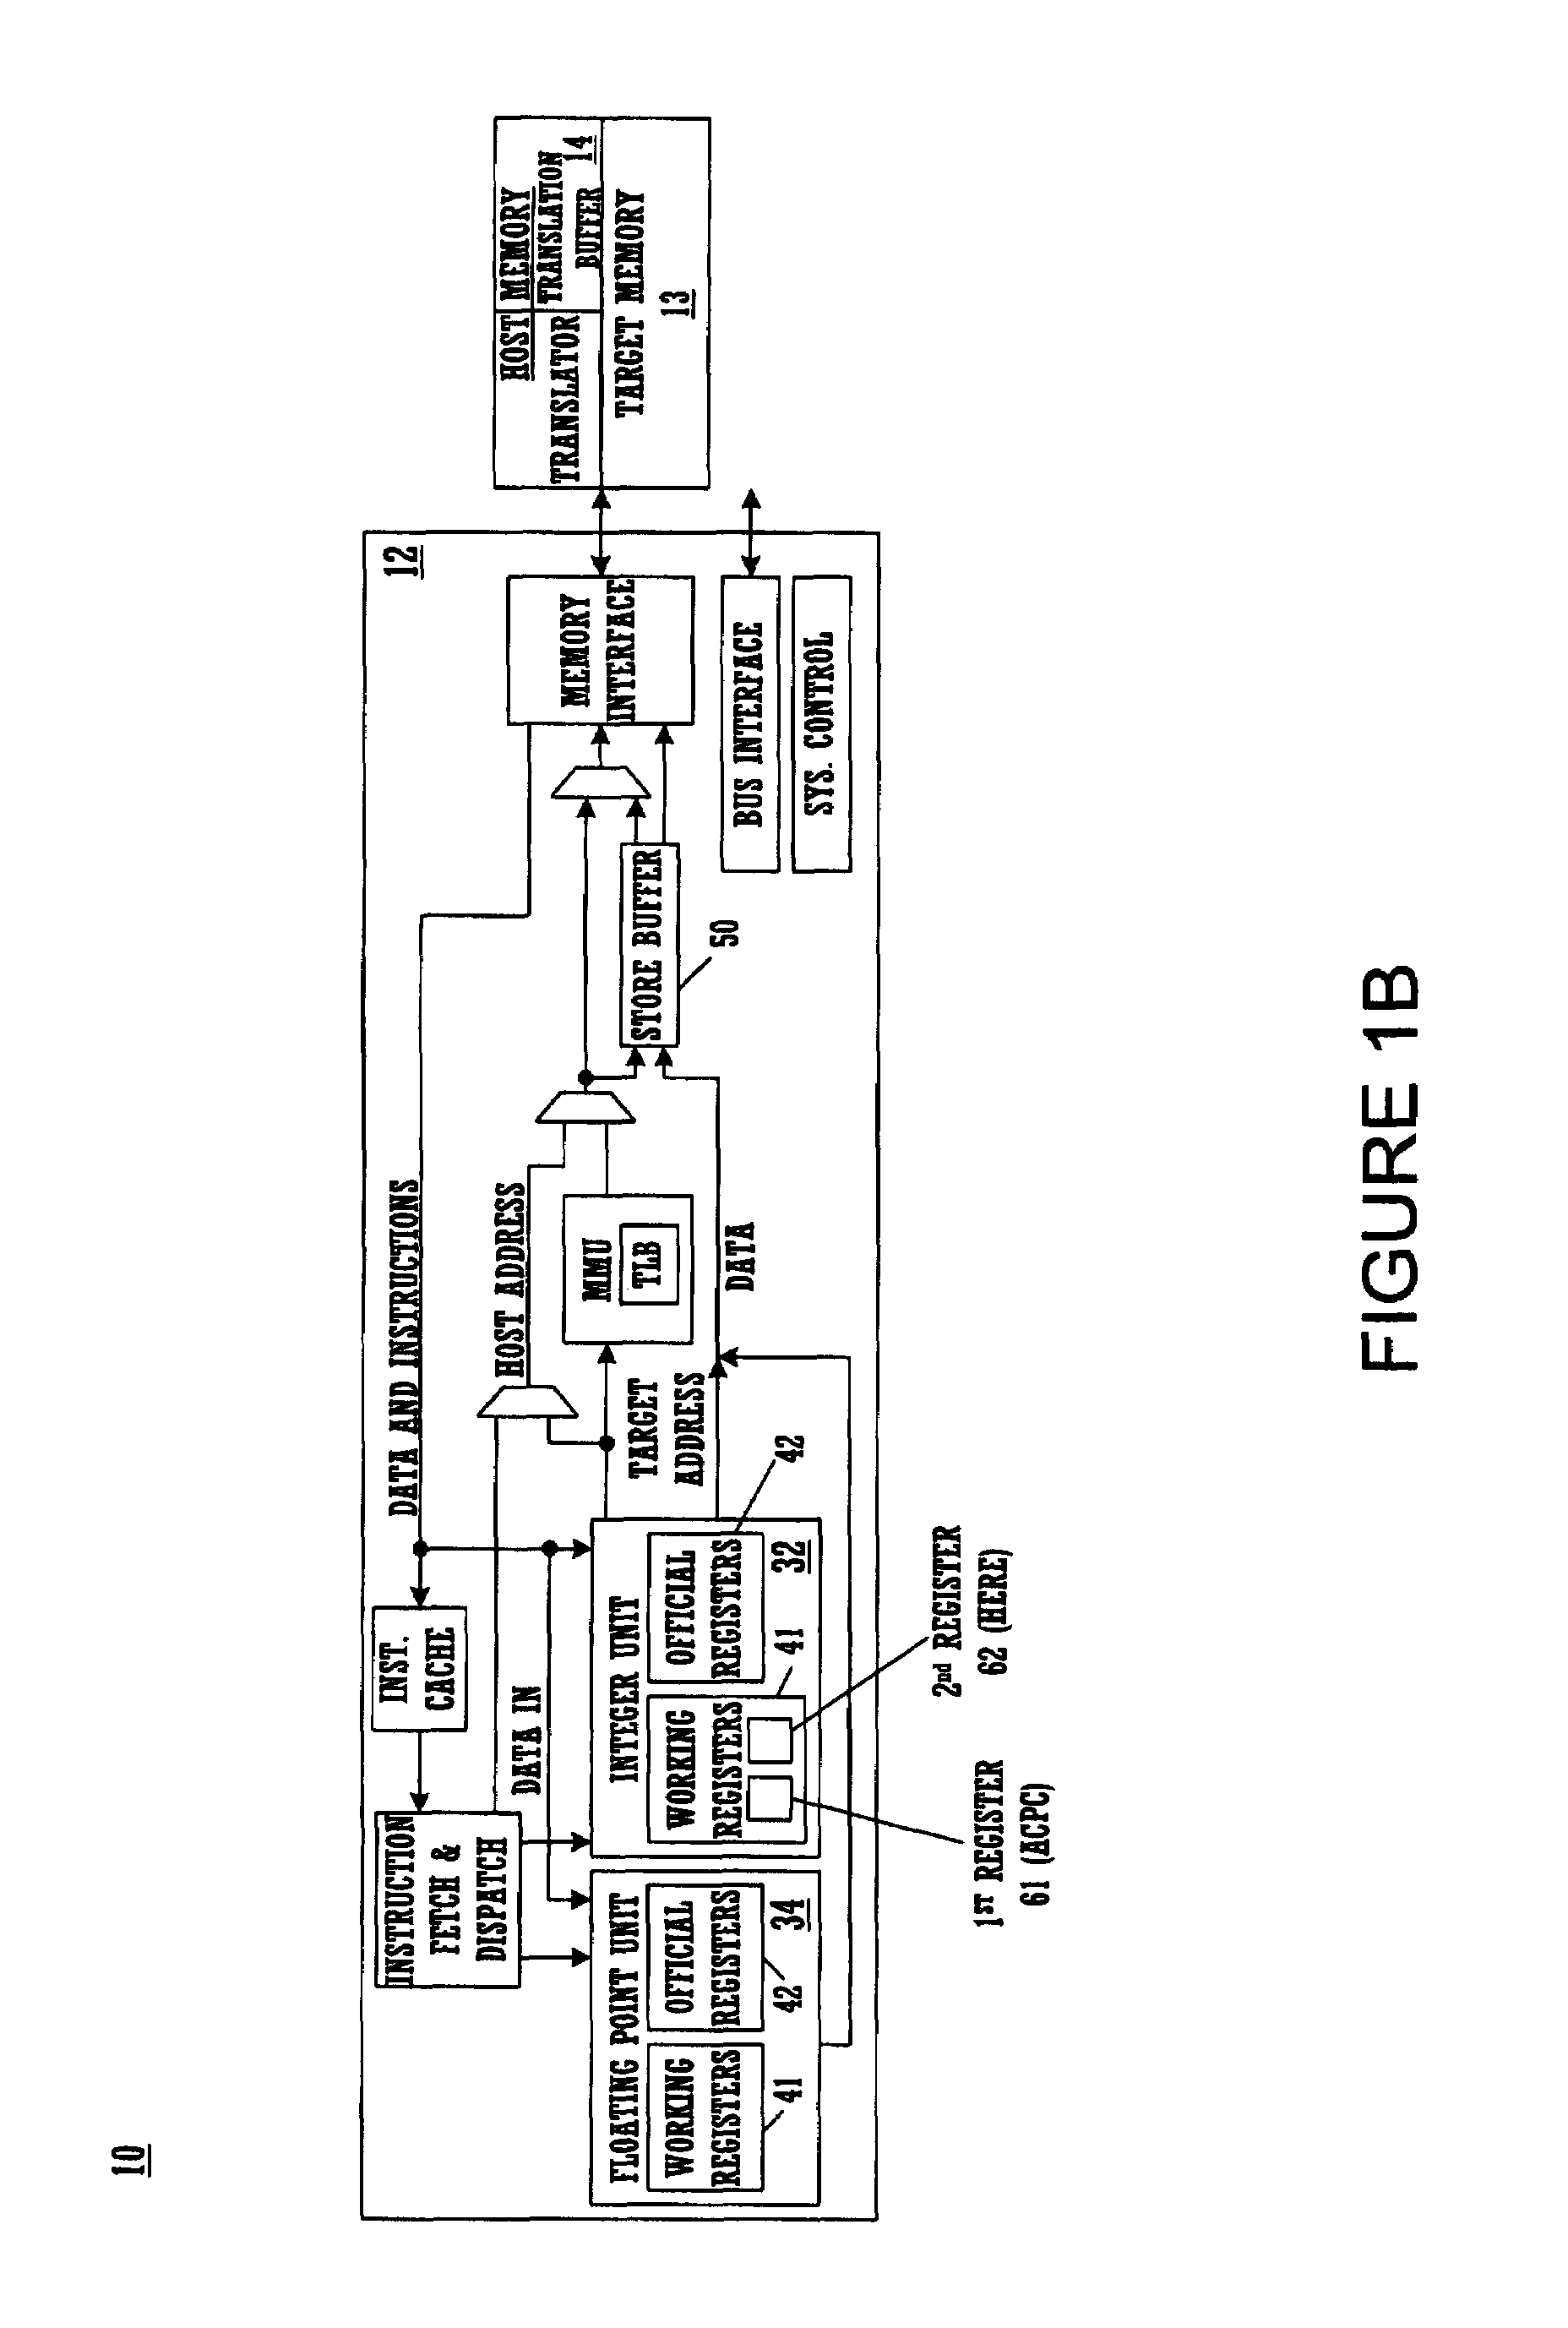 Methods and systems for maintaining information for locating non-native processor instructions when executing native processor instructions